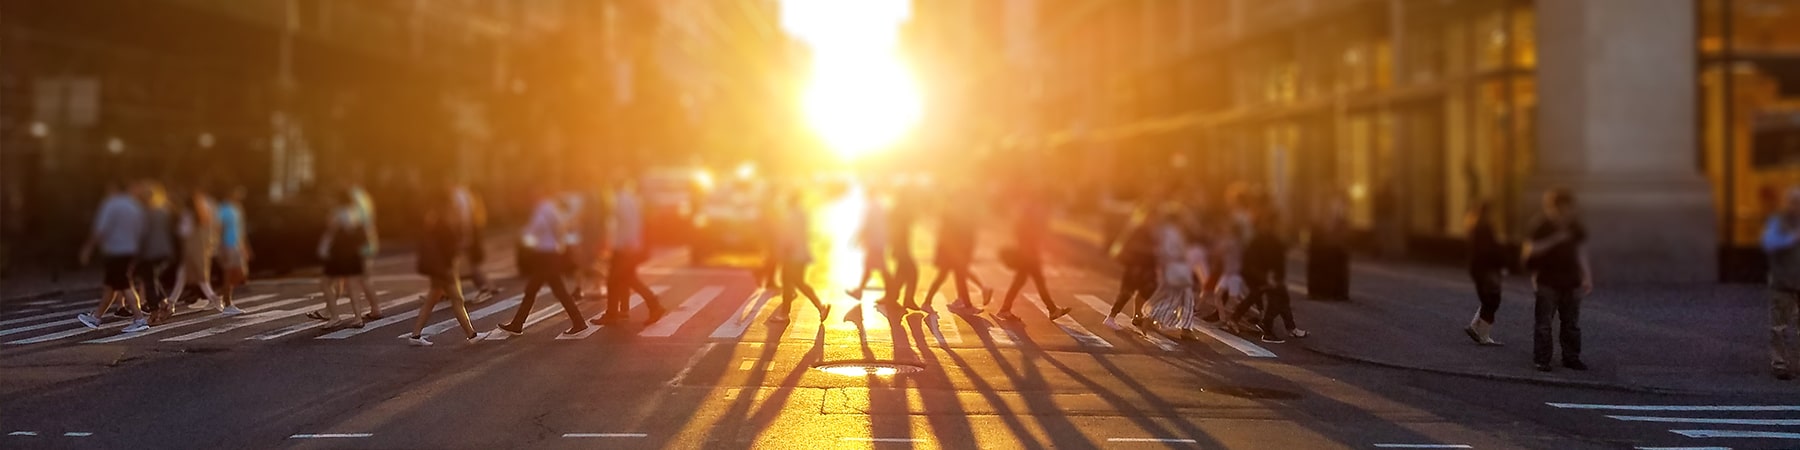 Students use a crosswalk as the sun sets in the background.